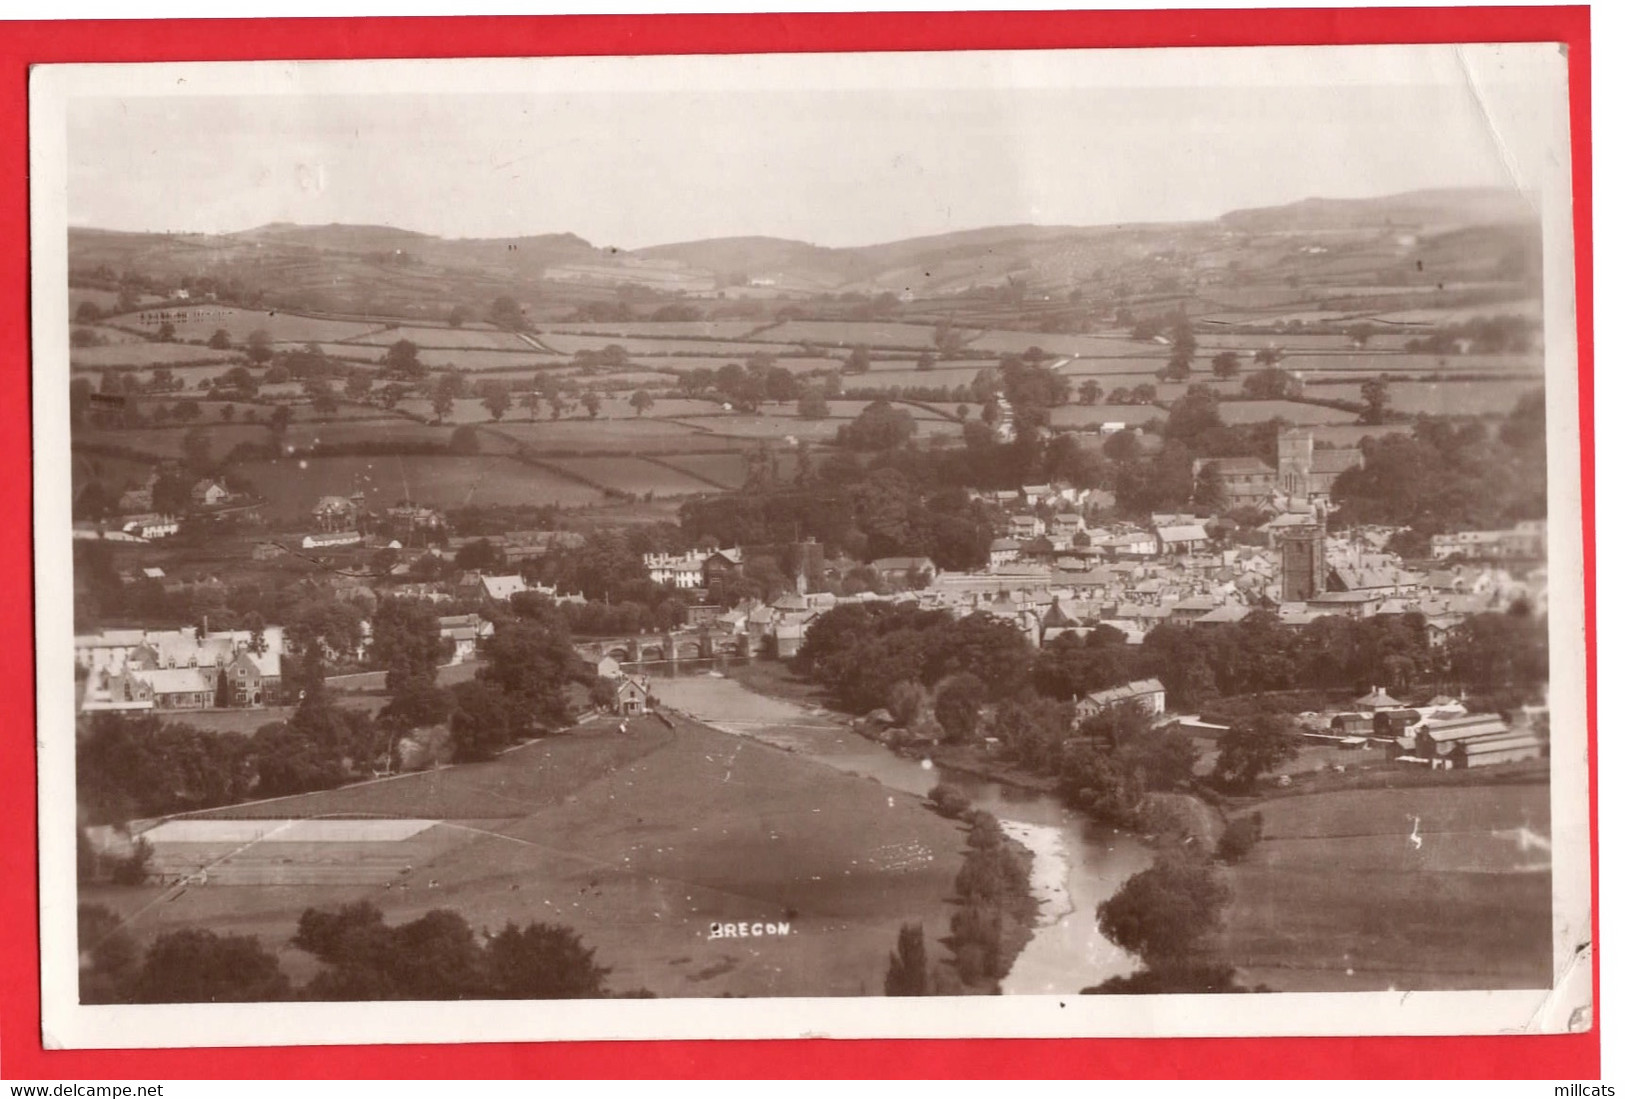 BRECONSHIRE   BRECON     GENERAL VIEW OF TOWN  RP  Pu 1940 - Breconshire